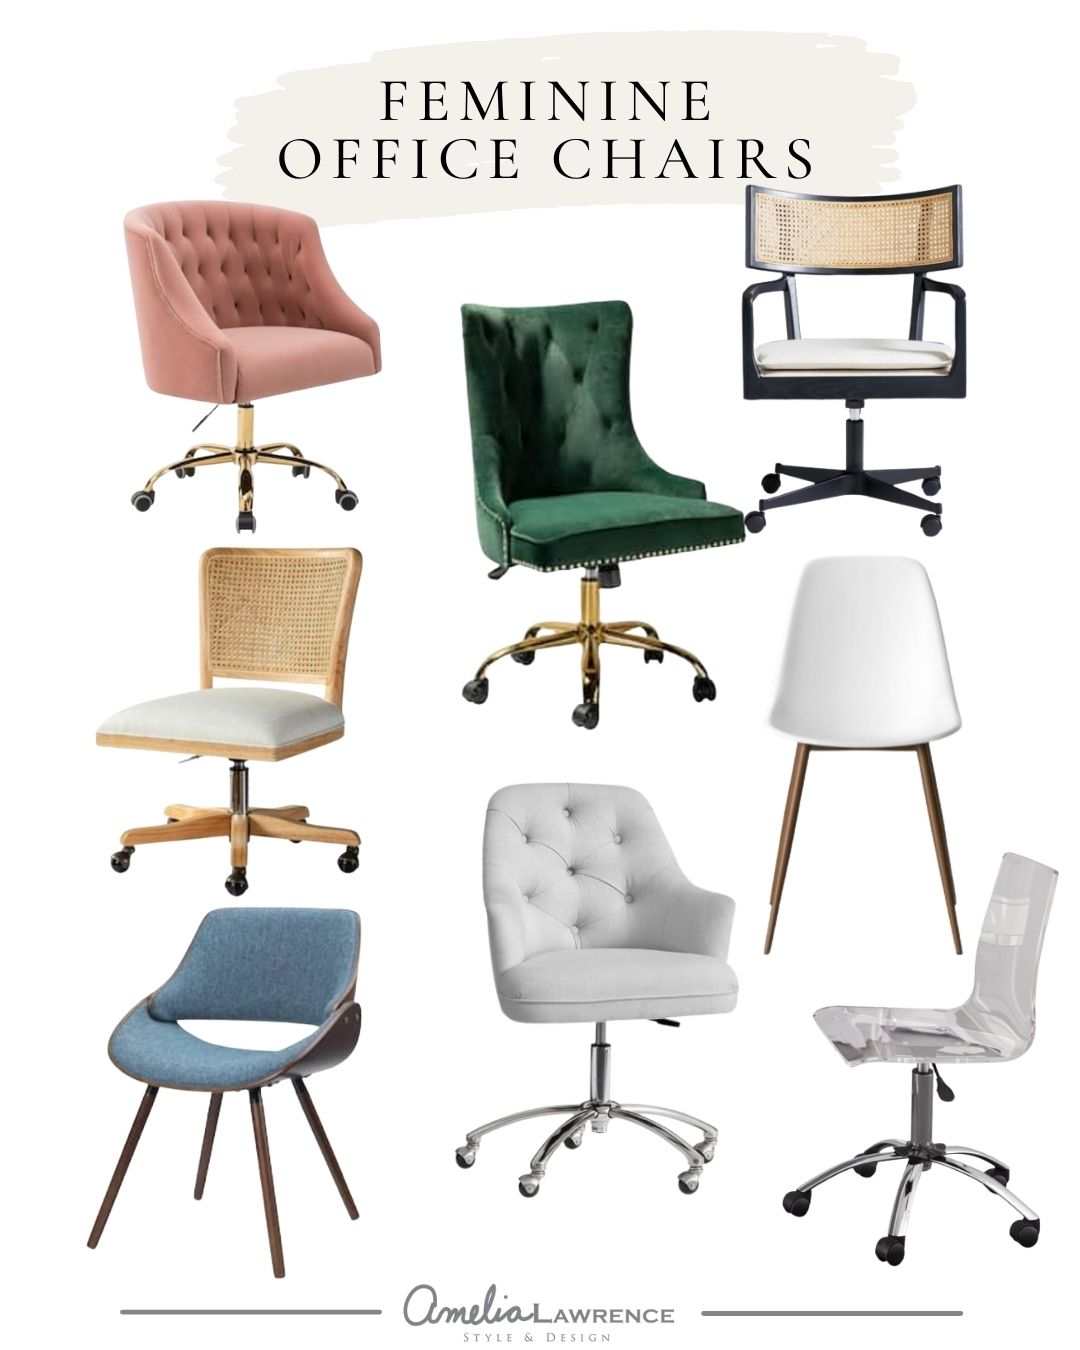 collage of curated feminine office chairs